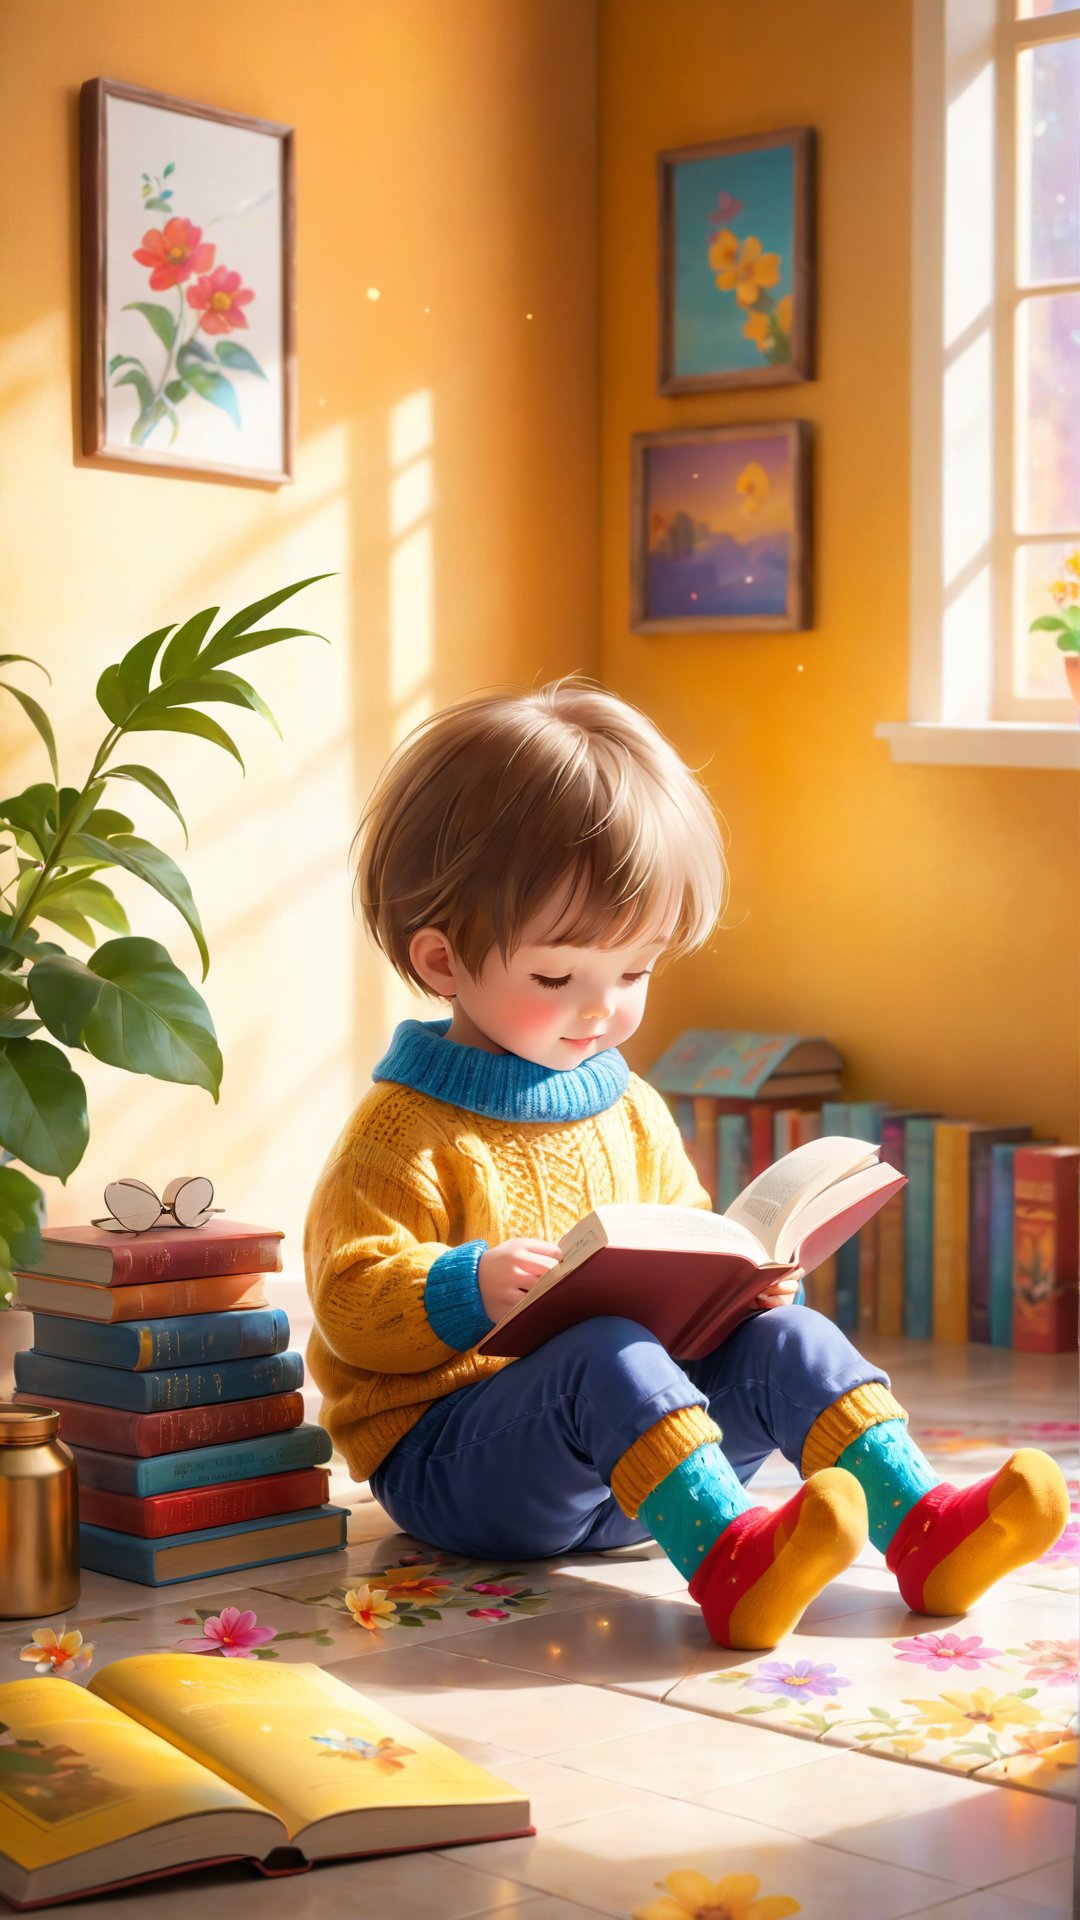 Flowers bloom bokeh background, flowers blooming, painting on the wall, books room, A heartwarming image of a young child sitting on the floor, completely engrossed in a book. The child is wearing a cozy sweater with a pair of colorful socks dangling off their feet. The book they're reading is an old, leather-bound classic with a worn leather cover and frayed edges. The room is bathed in warm, golden sunlight, creating a serene and inviting atmosphere.